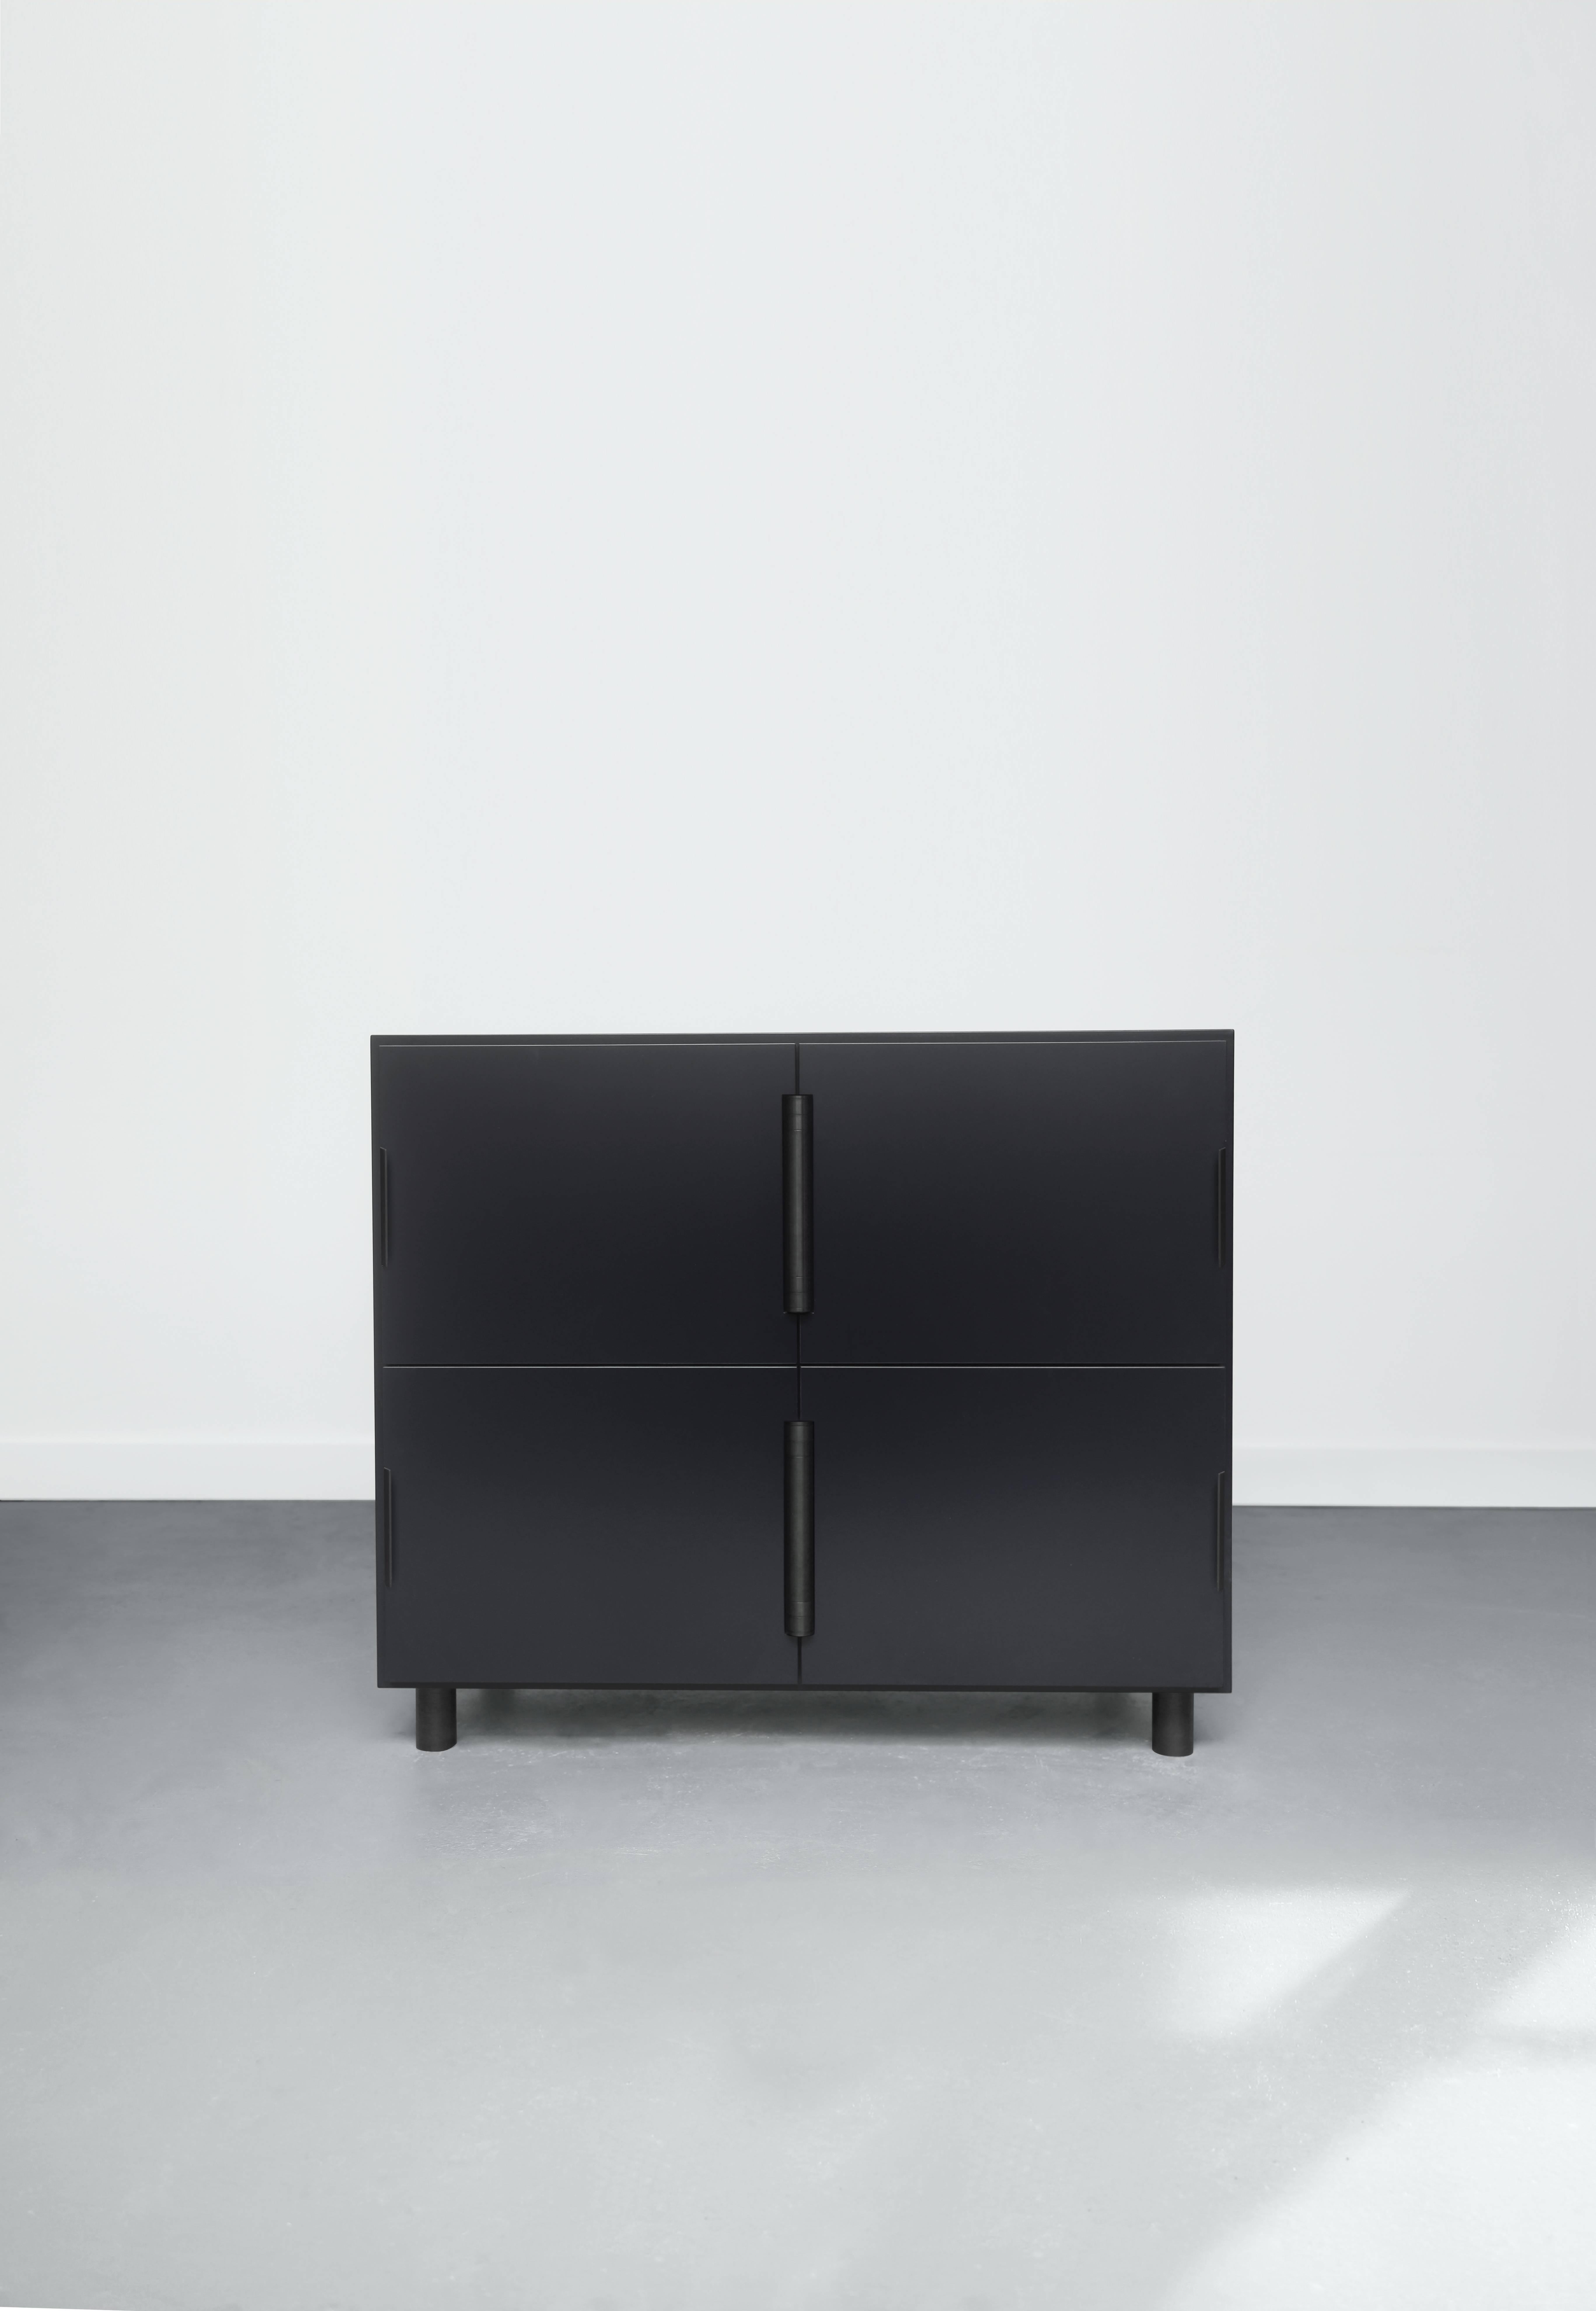 Pictured in Coal (grey), Nocturne is a multi-use storage cabinet with an austere beauty. Its center-hung doors swing inward on a shared hinge. The modern case is matte lacquered wood, with a sophisticated blackened steel hardware set. 

Additional